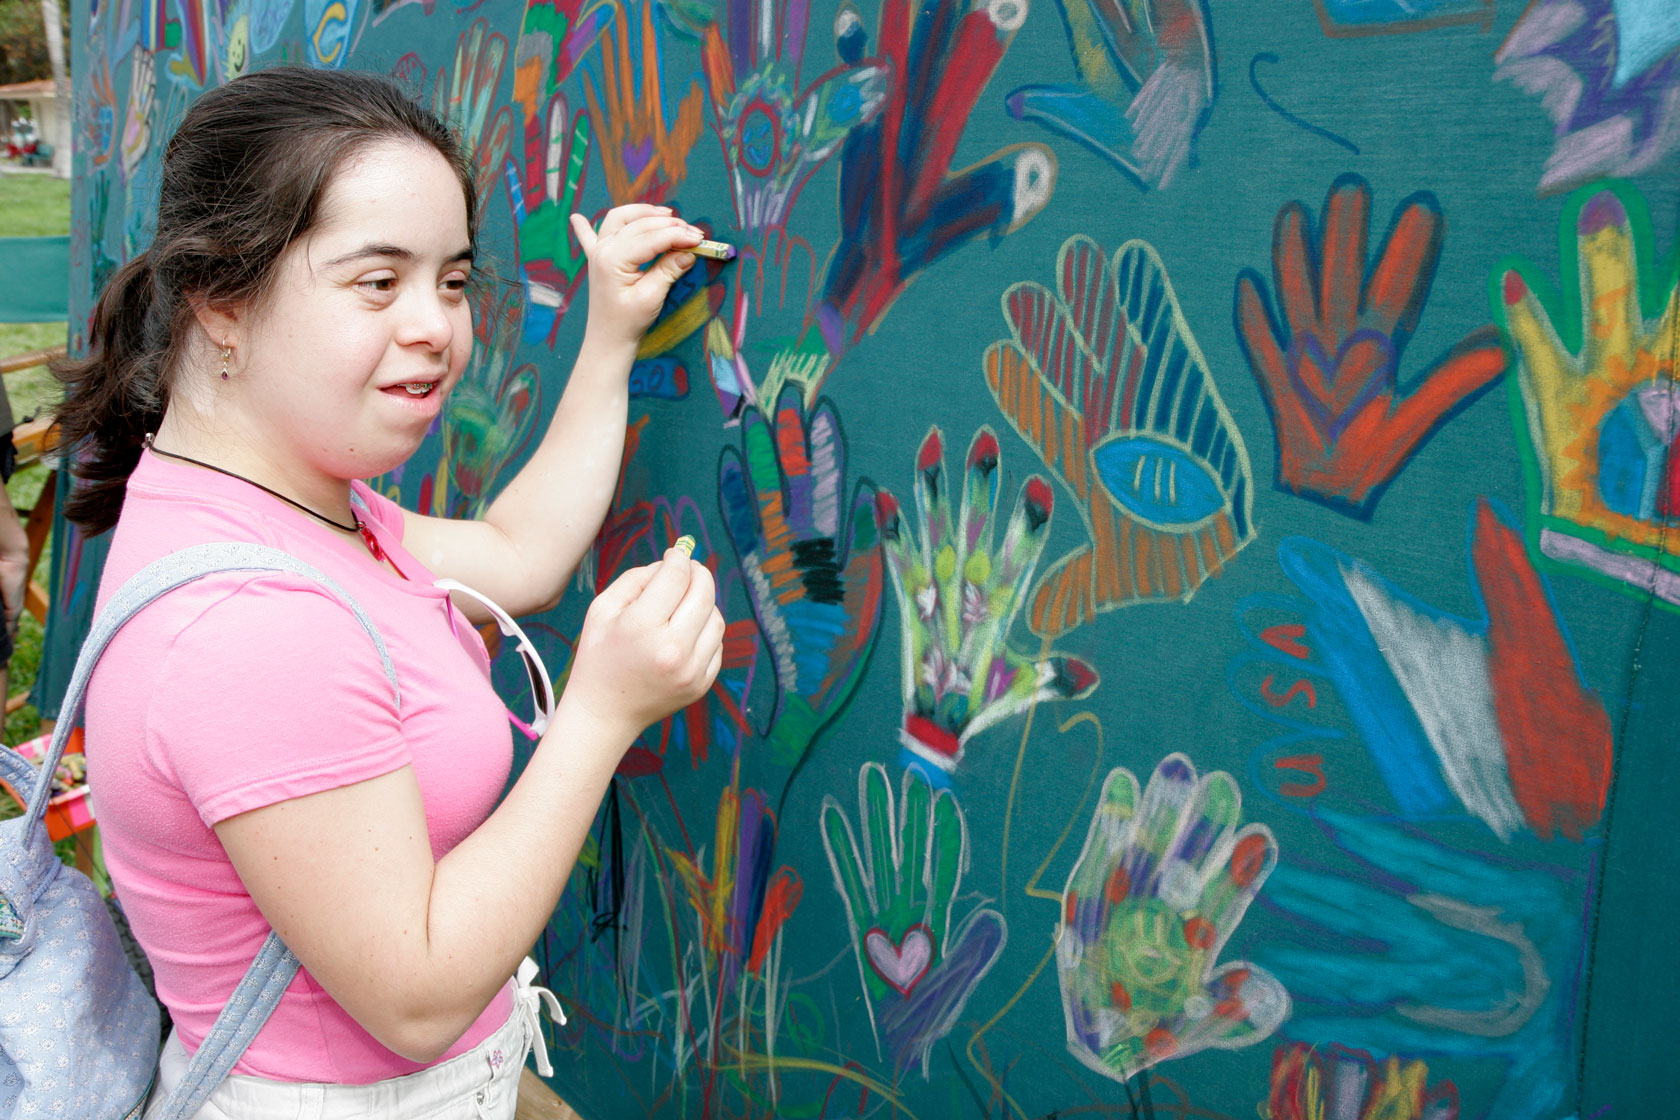 Photo shows a young woman drawing on a chalkboard covered with colorful handprints.